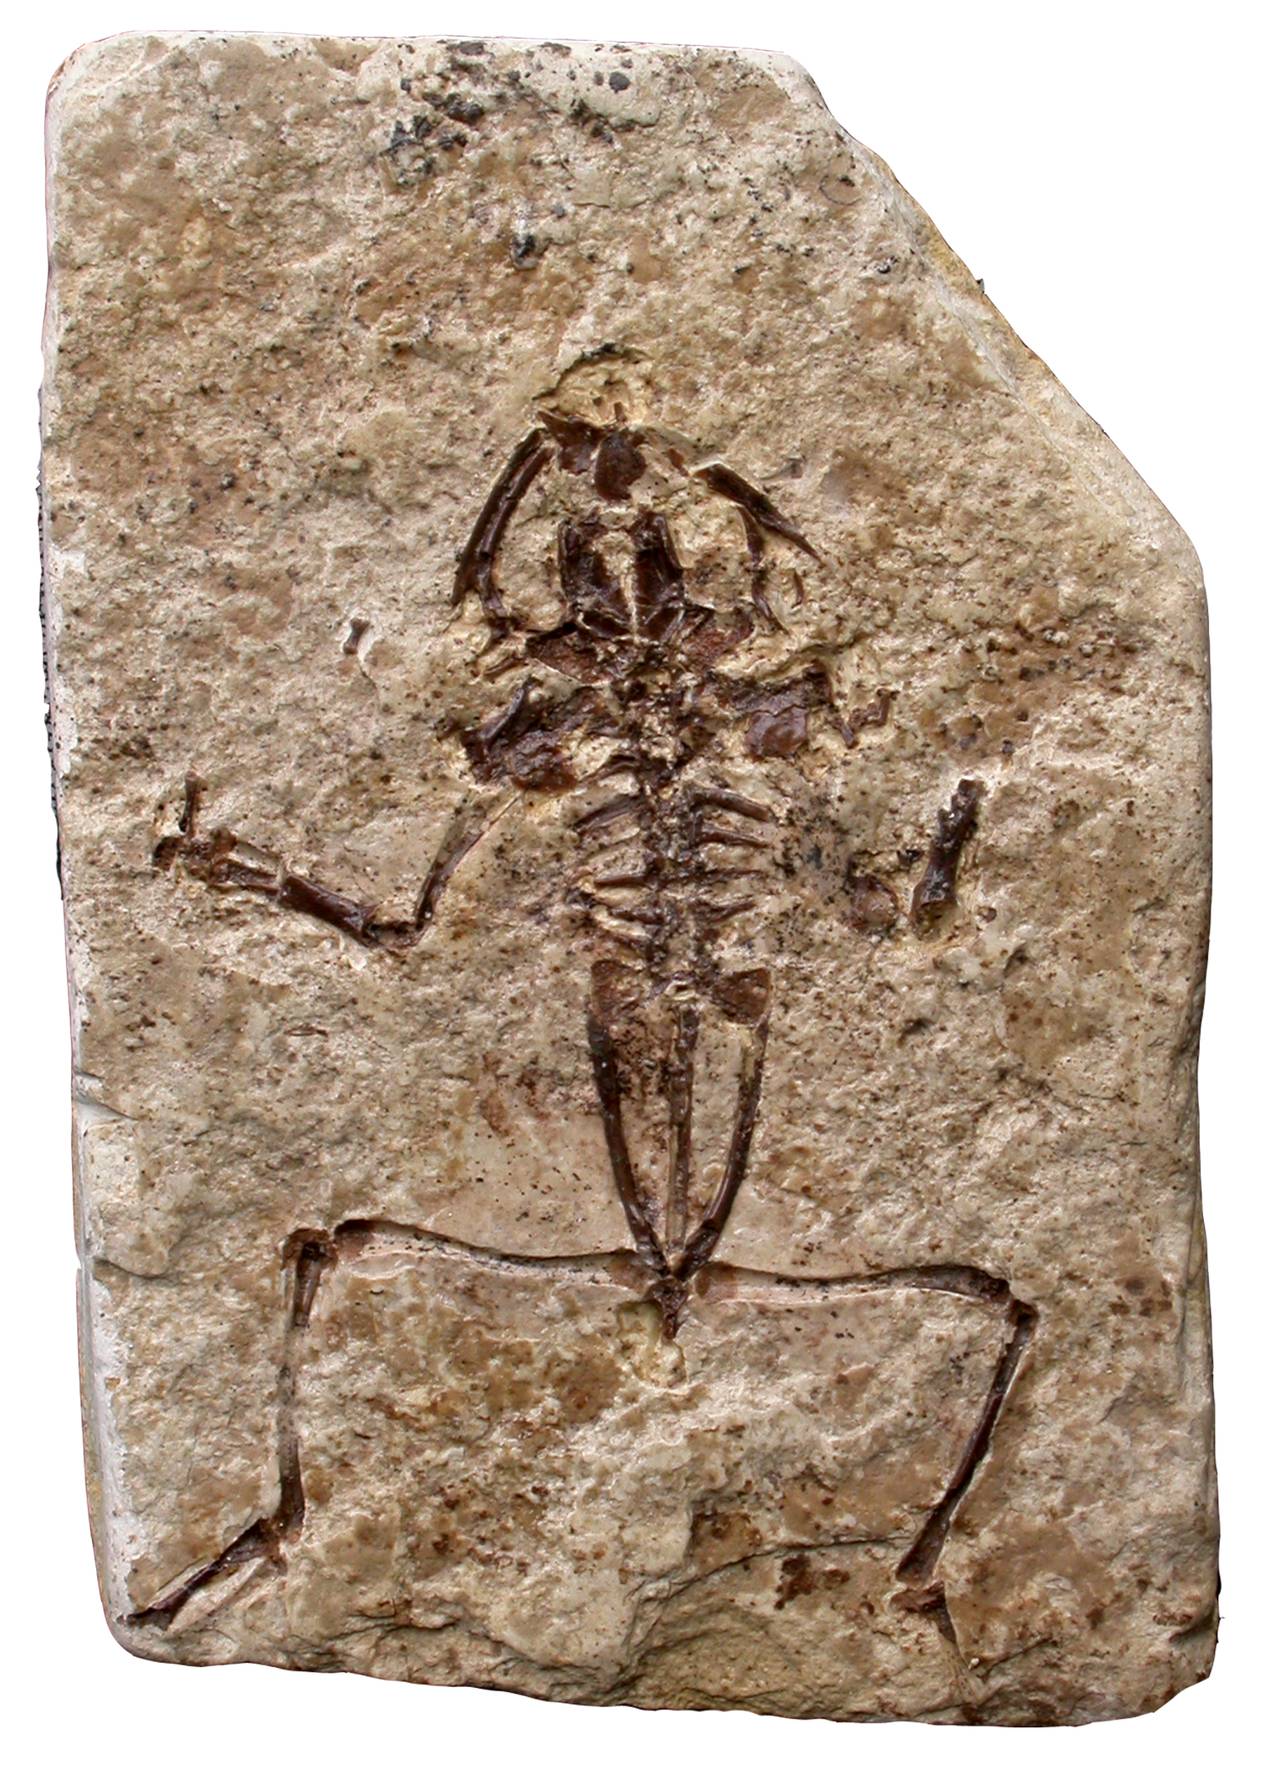 Fossil remain of a European green toad